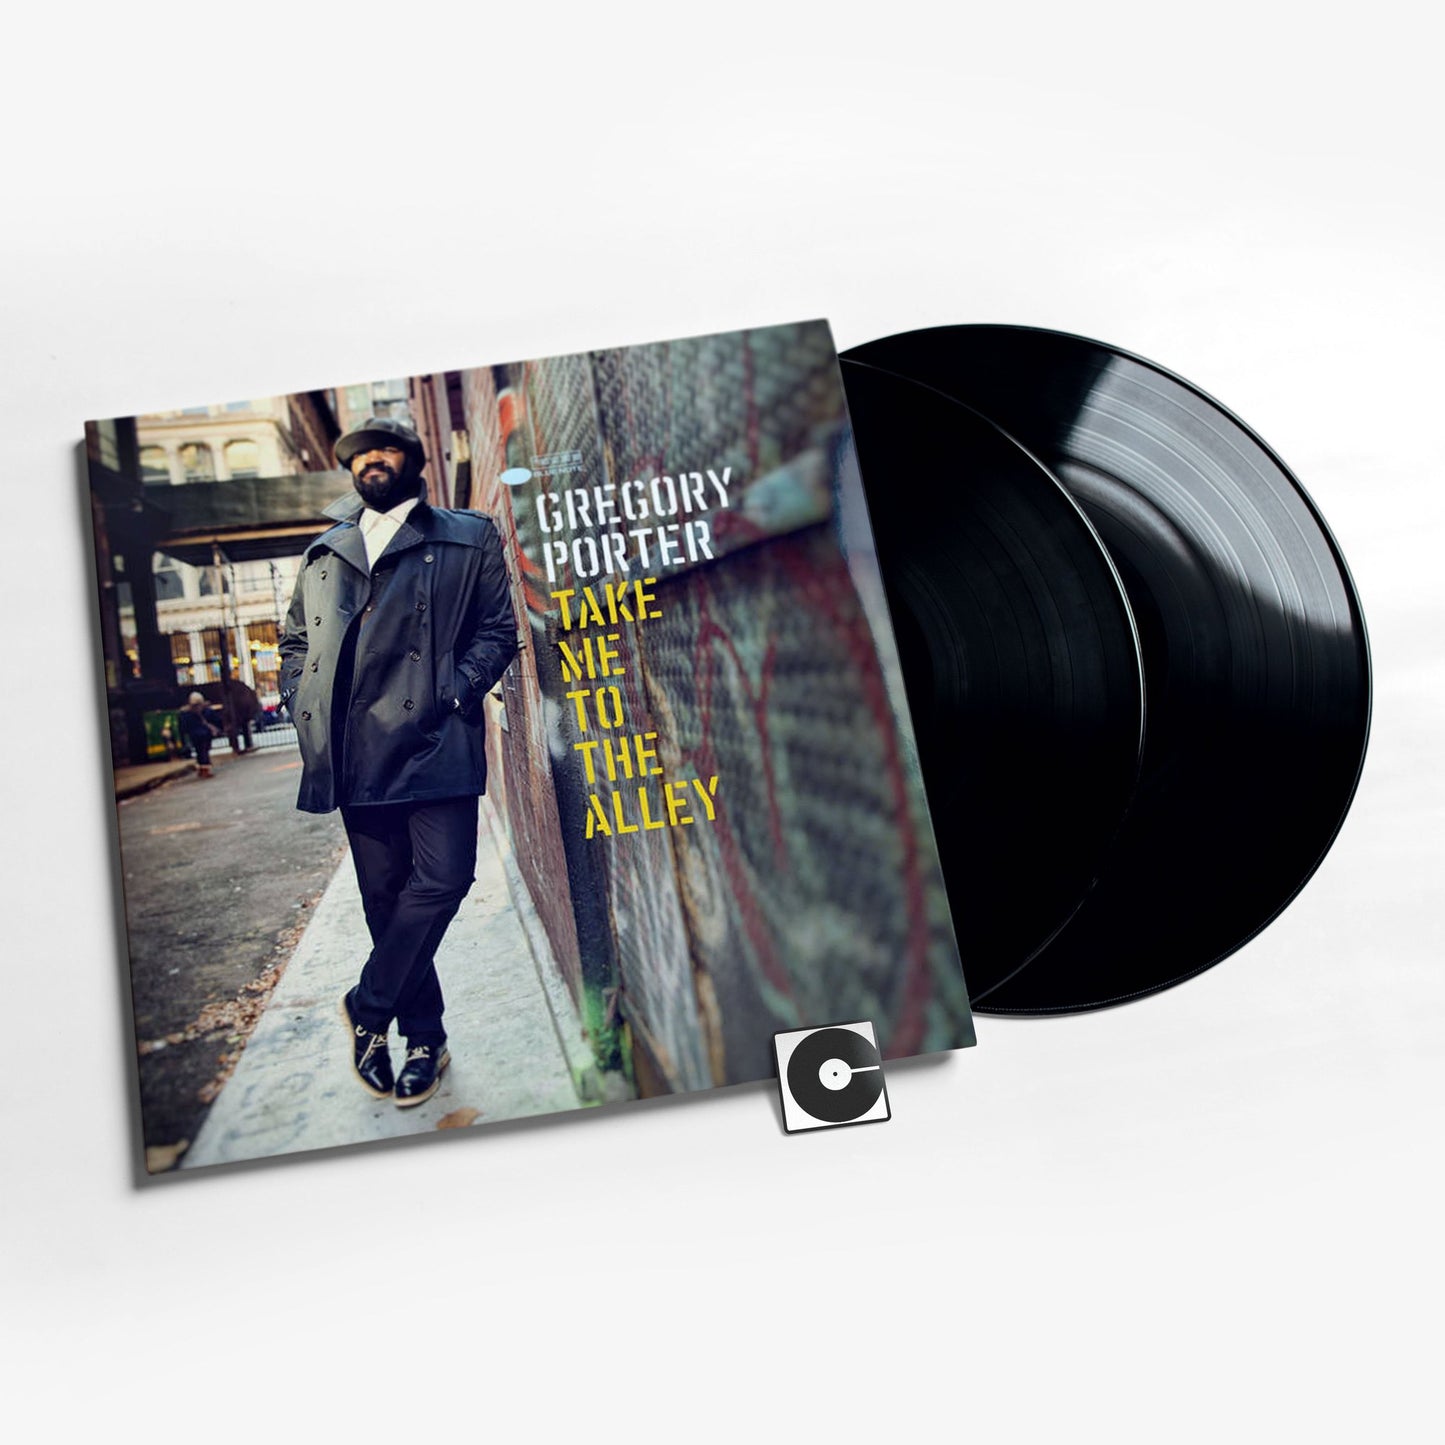 Gregory Porter - "Take Me To The Alley"